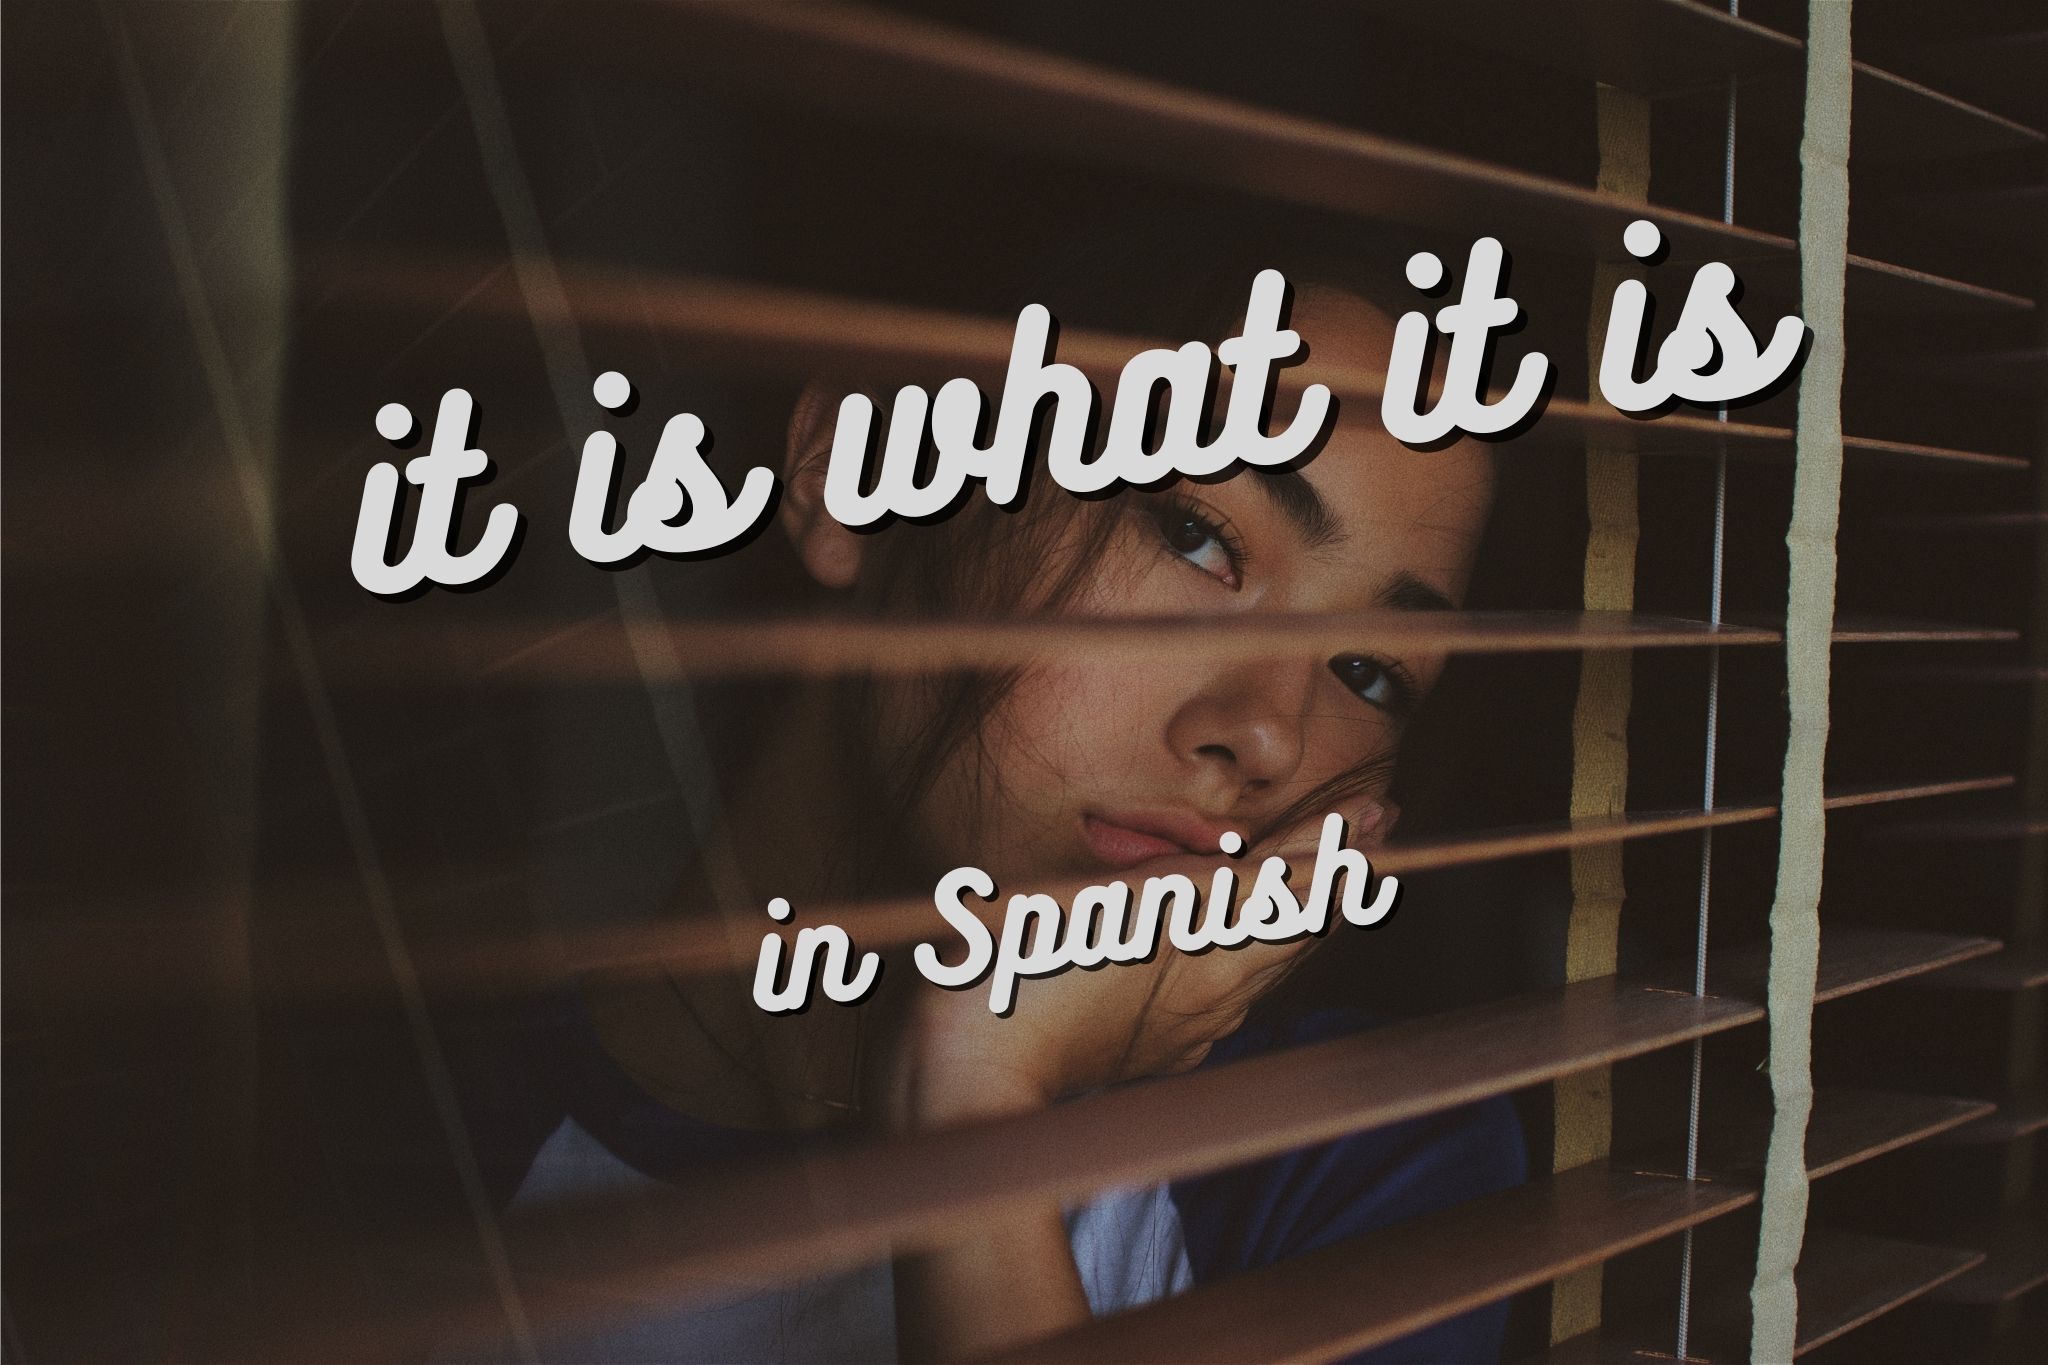 It is what it is” in Spanish: Essential idiomatic expressions